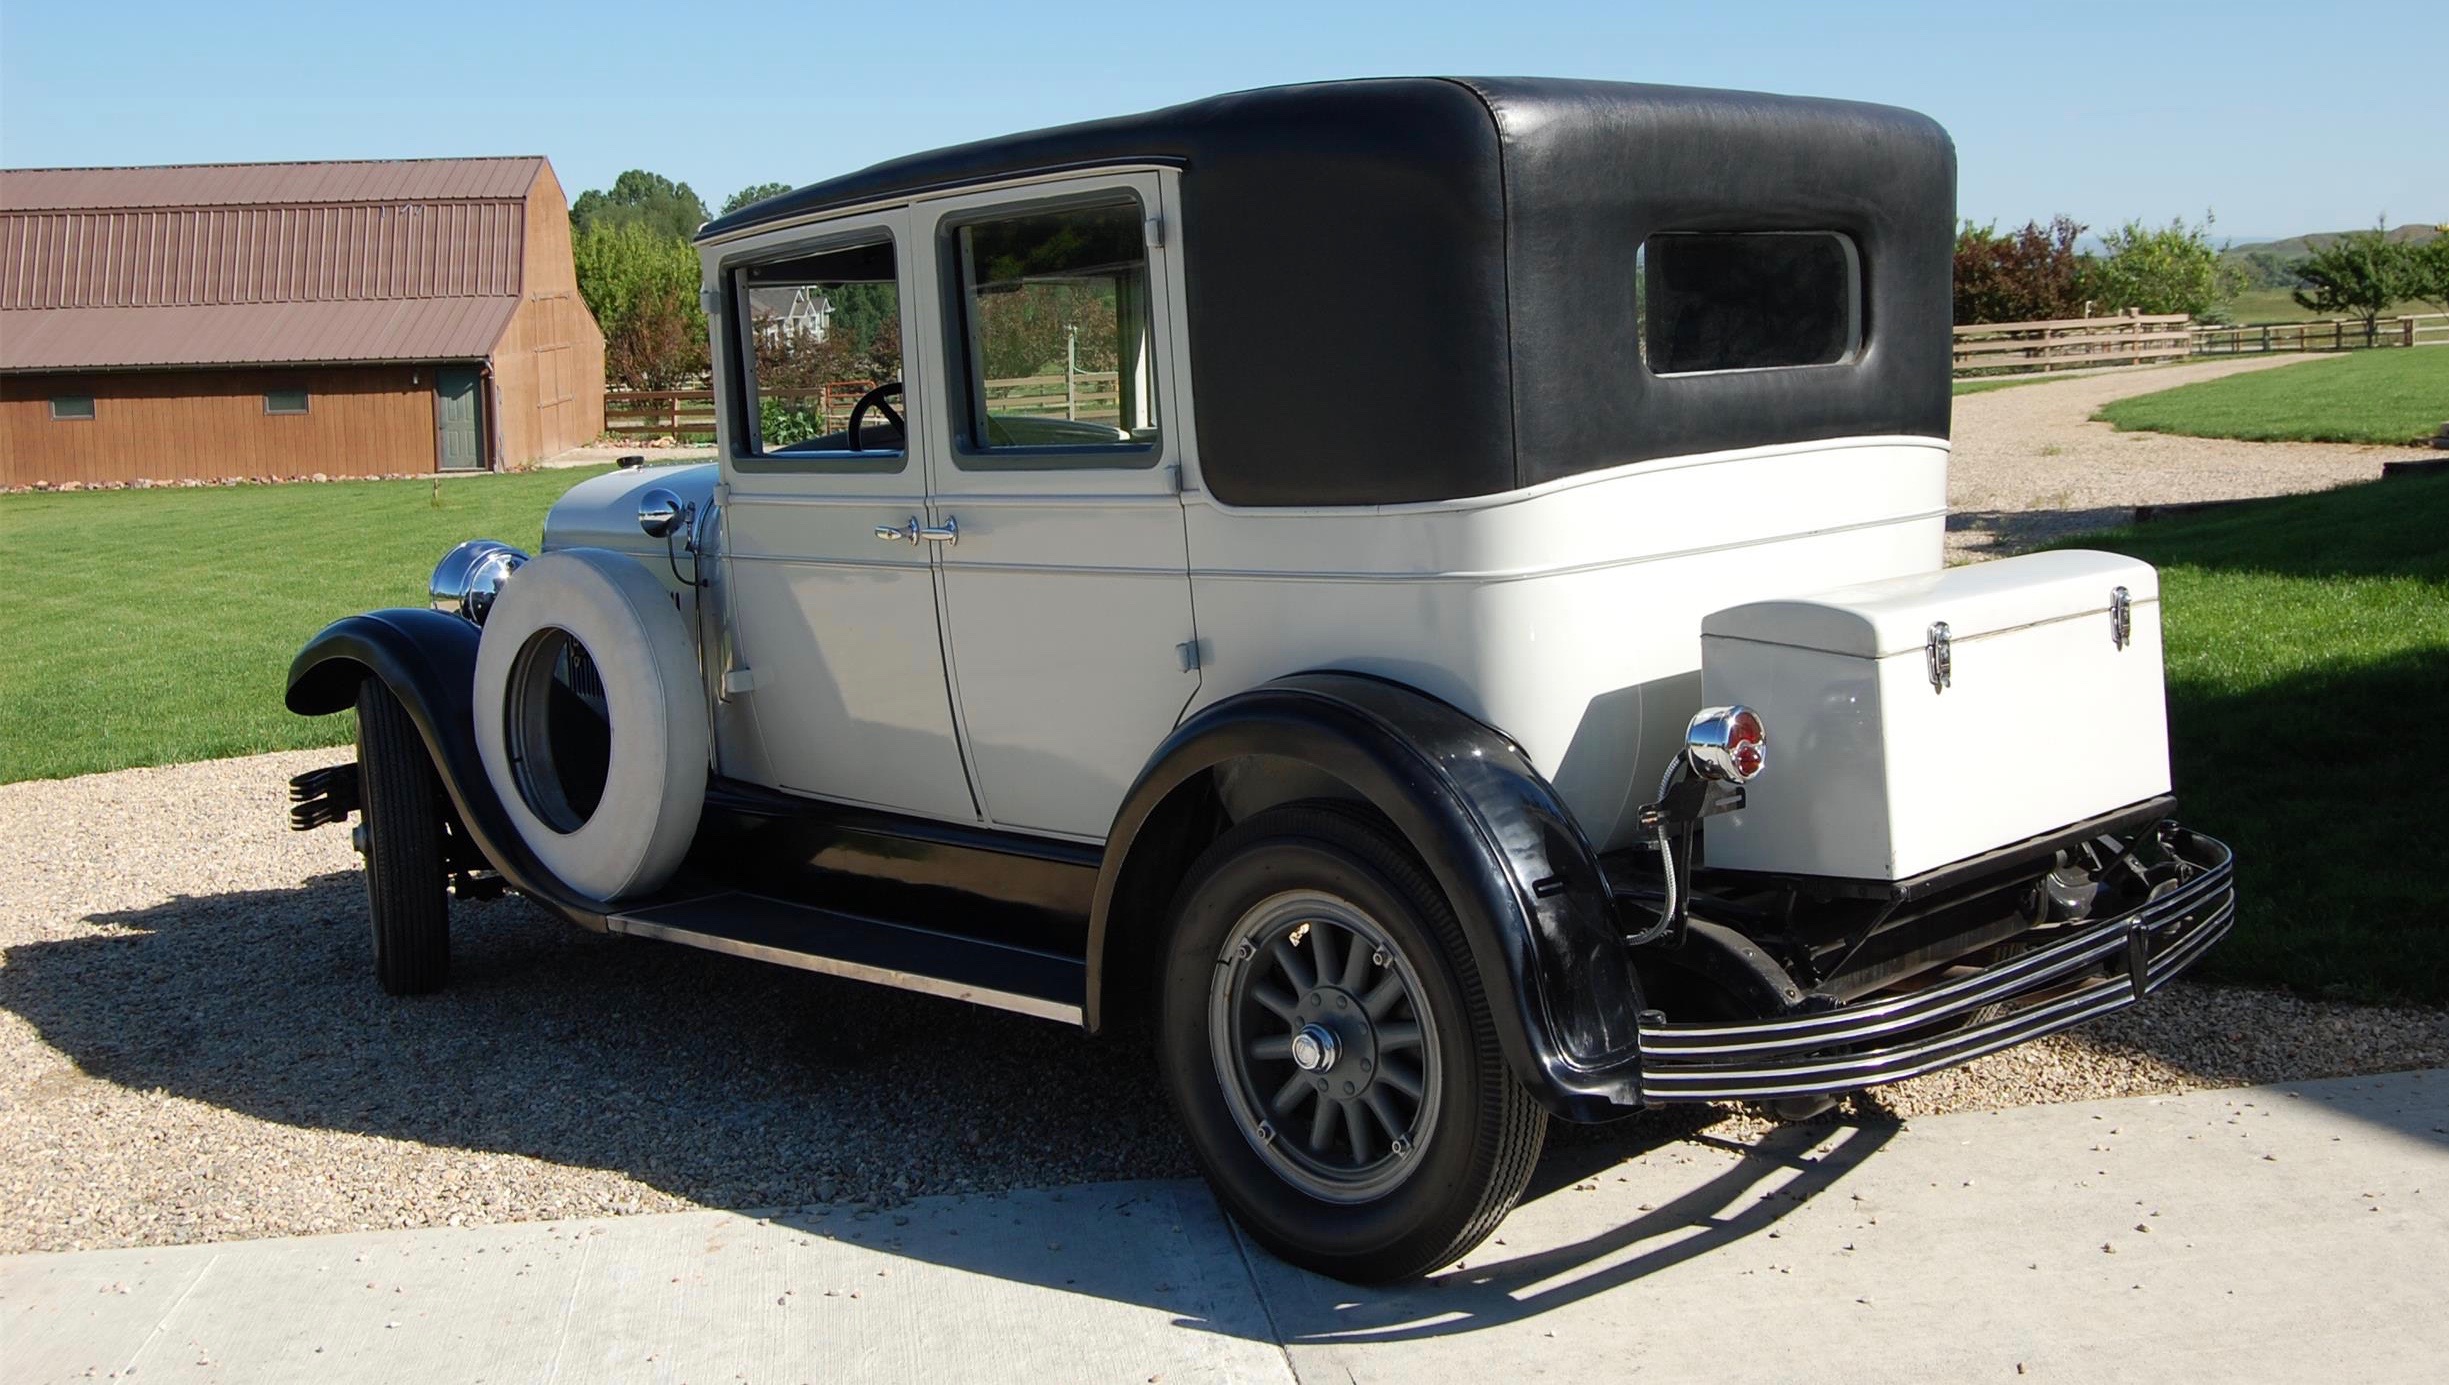 1928 Chrysler Model 72, This car’s not too old, but the seller may be, ClassicCars.com Journal